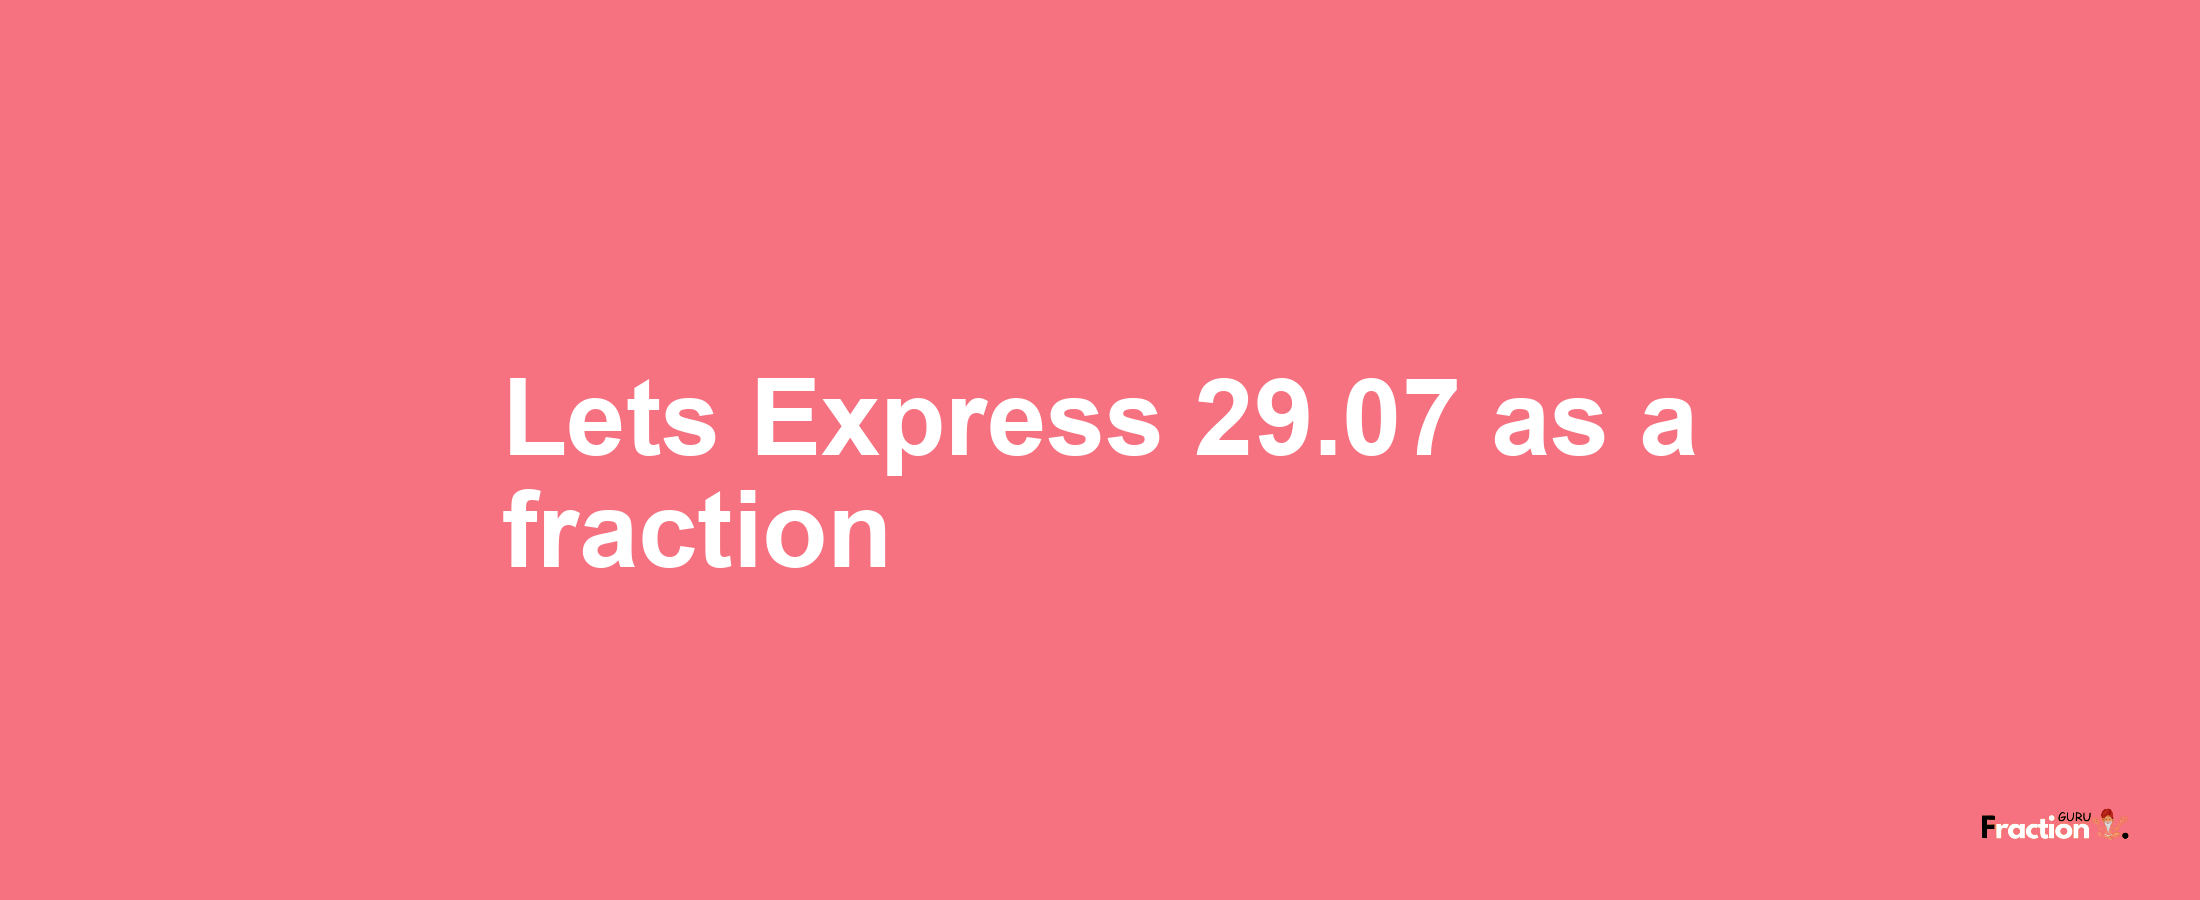 Lets Express 29.07 as afraction